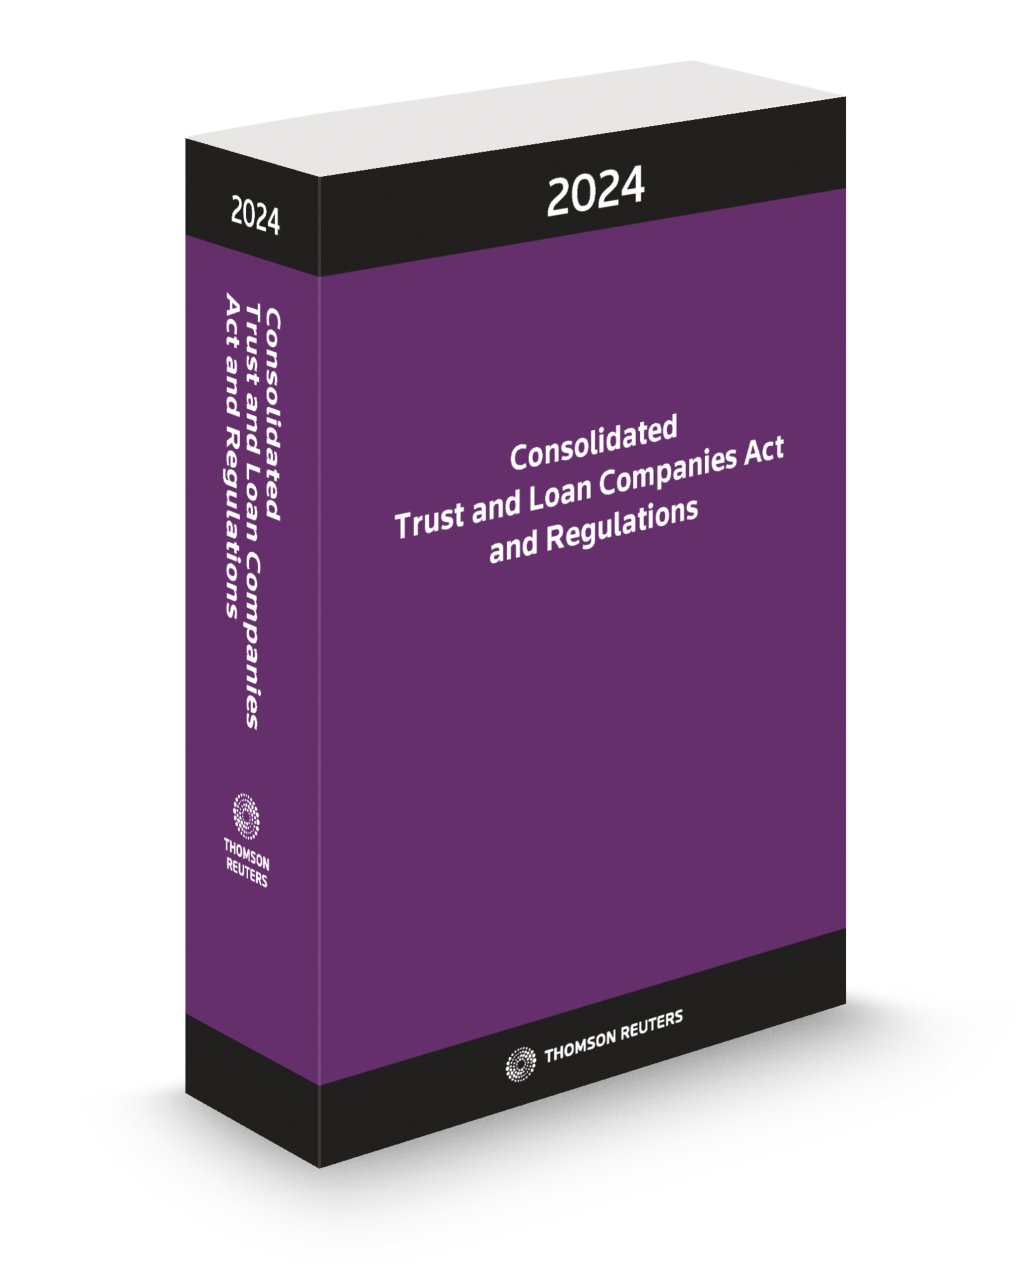 Cover of Consolidated Trust and Loan Companies Act and Regulations, 2024